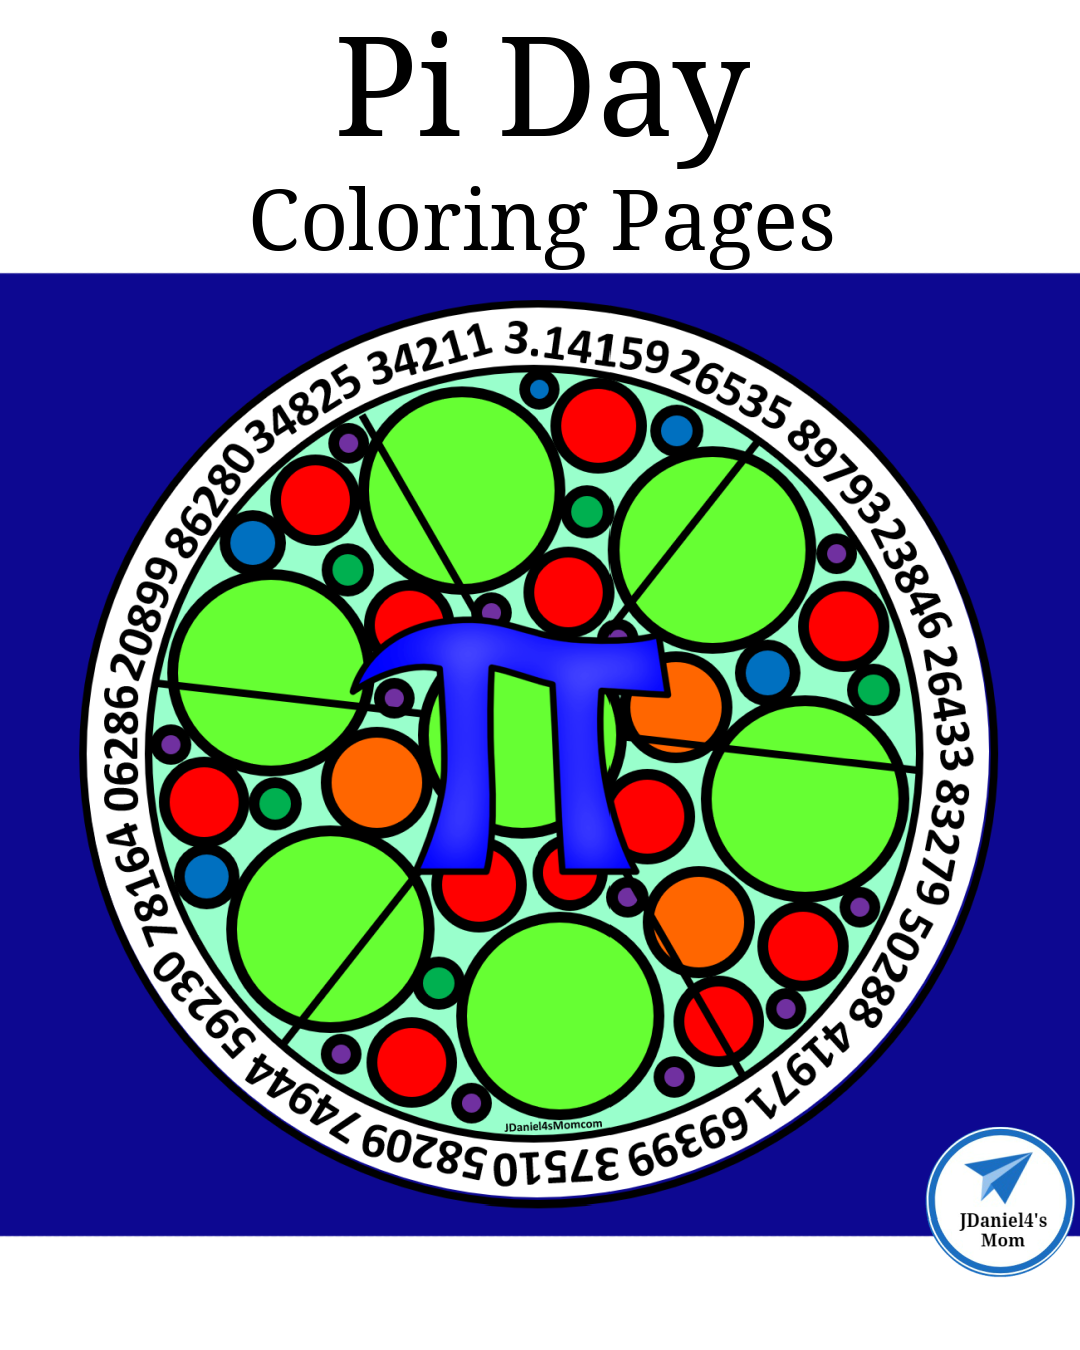 Pi Day Coloring Pages 